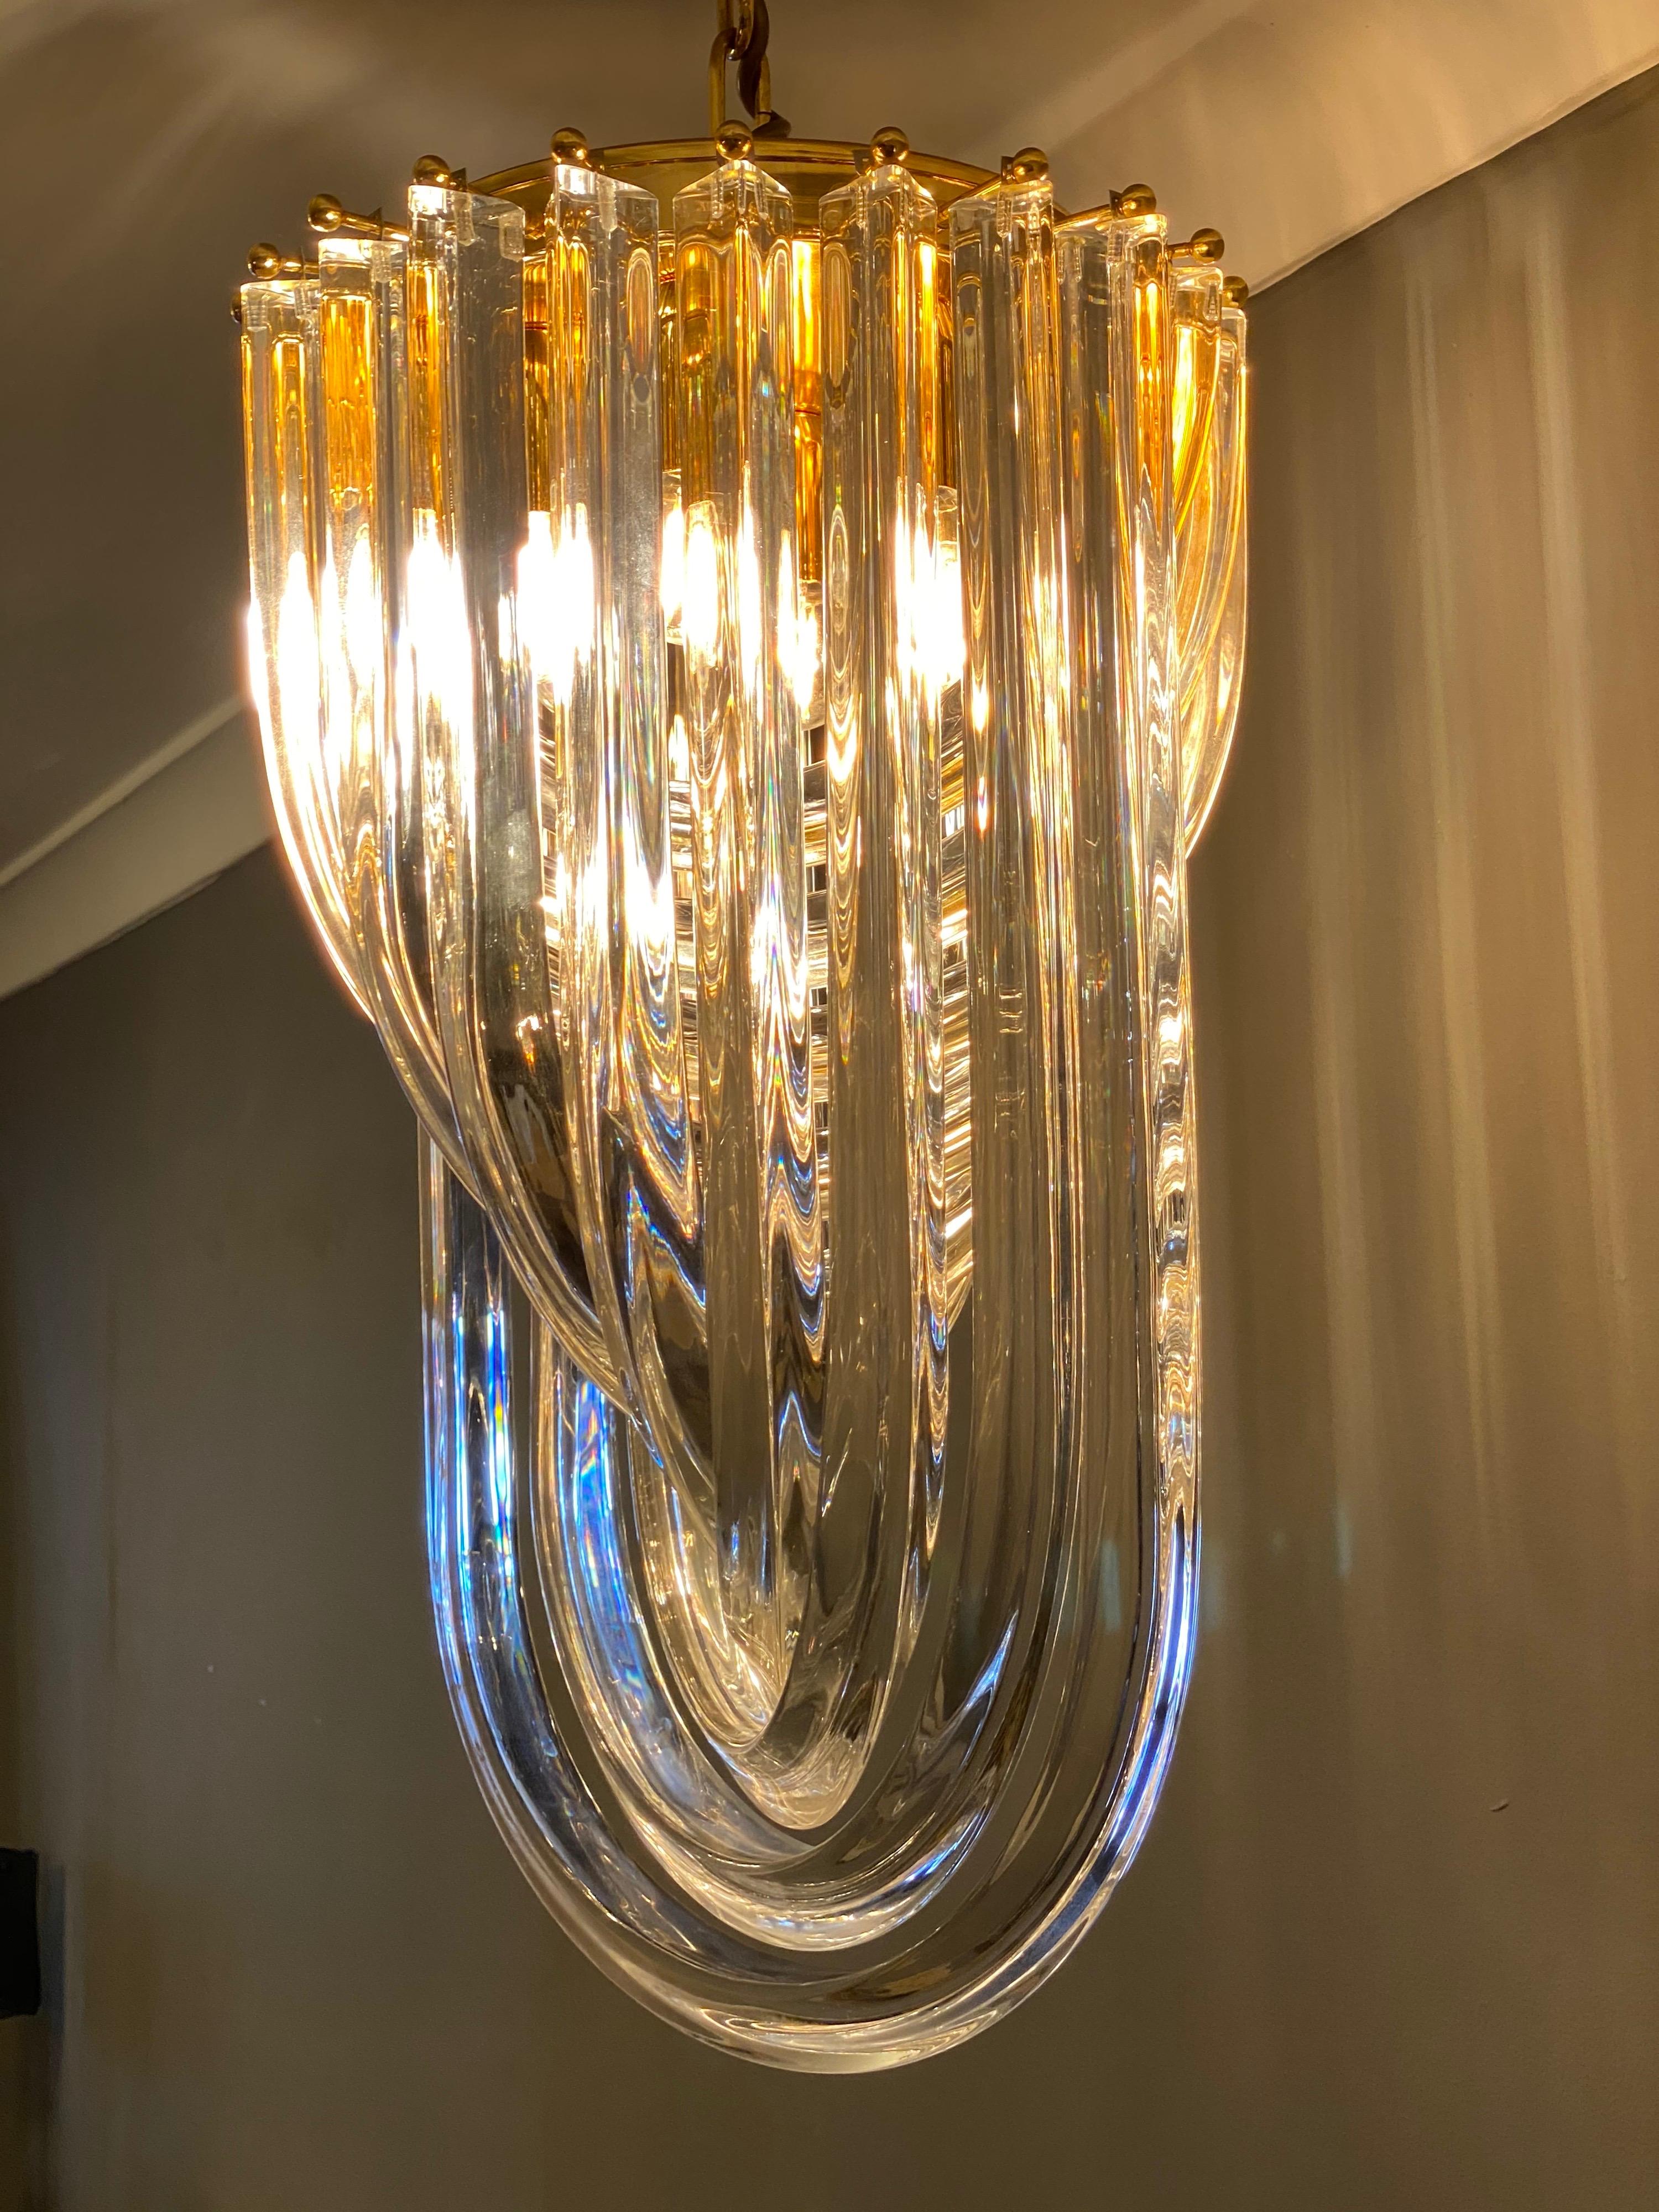 A Murano curved glass chandelier with brass frame, by Industria Veneziana designed by Carlo Nason in the 1970s. This is a late 1980s model in good order and fantastic quality, by a recognised Italian manufacturer in Venice.